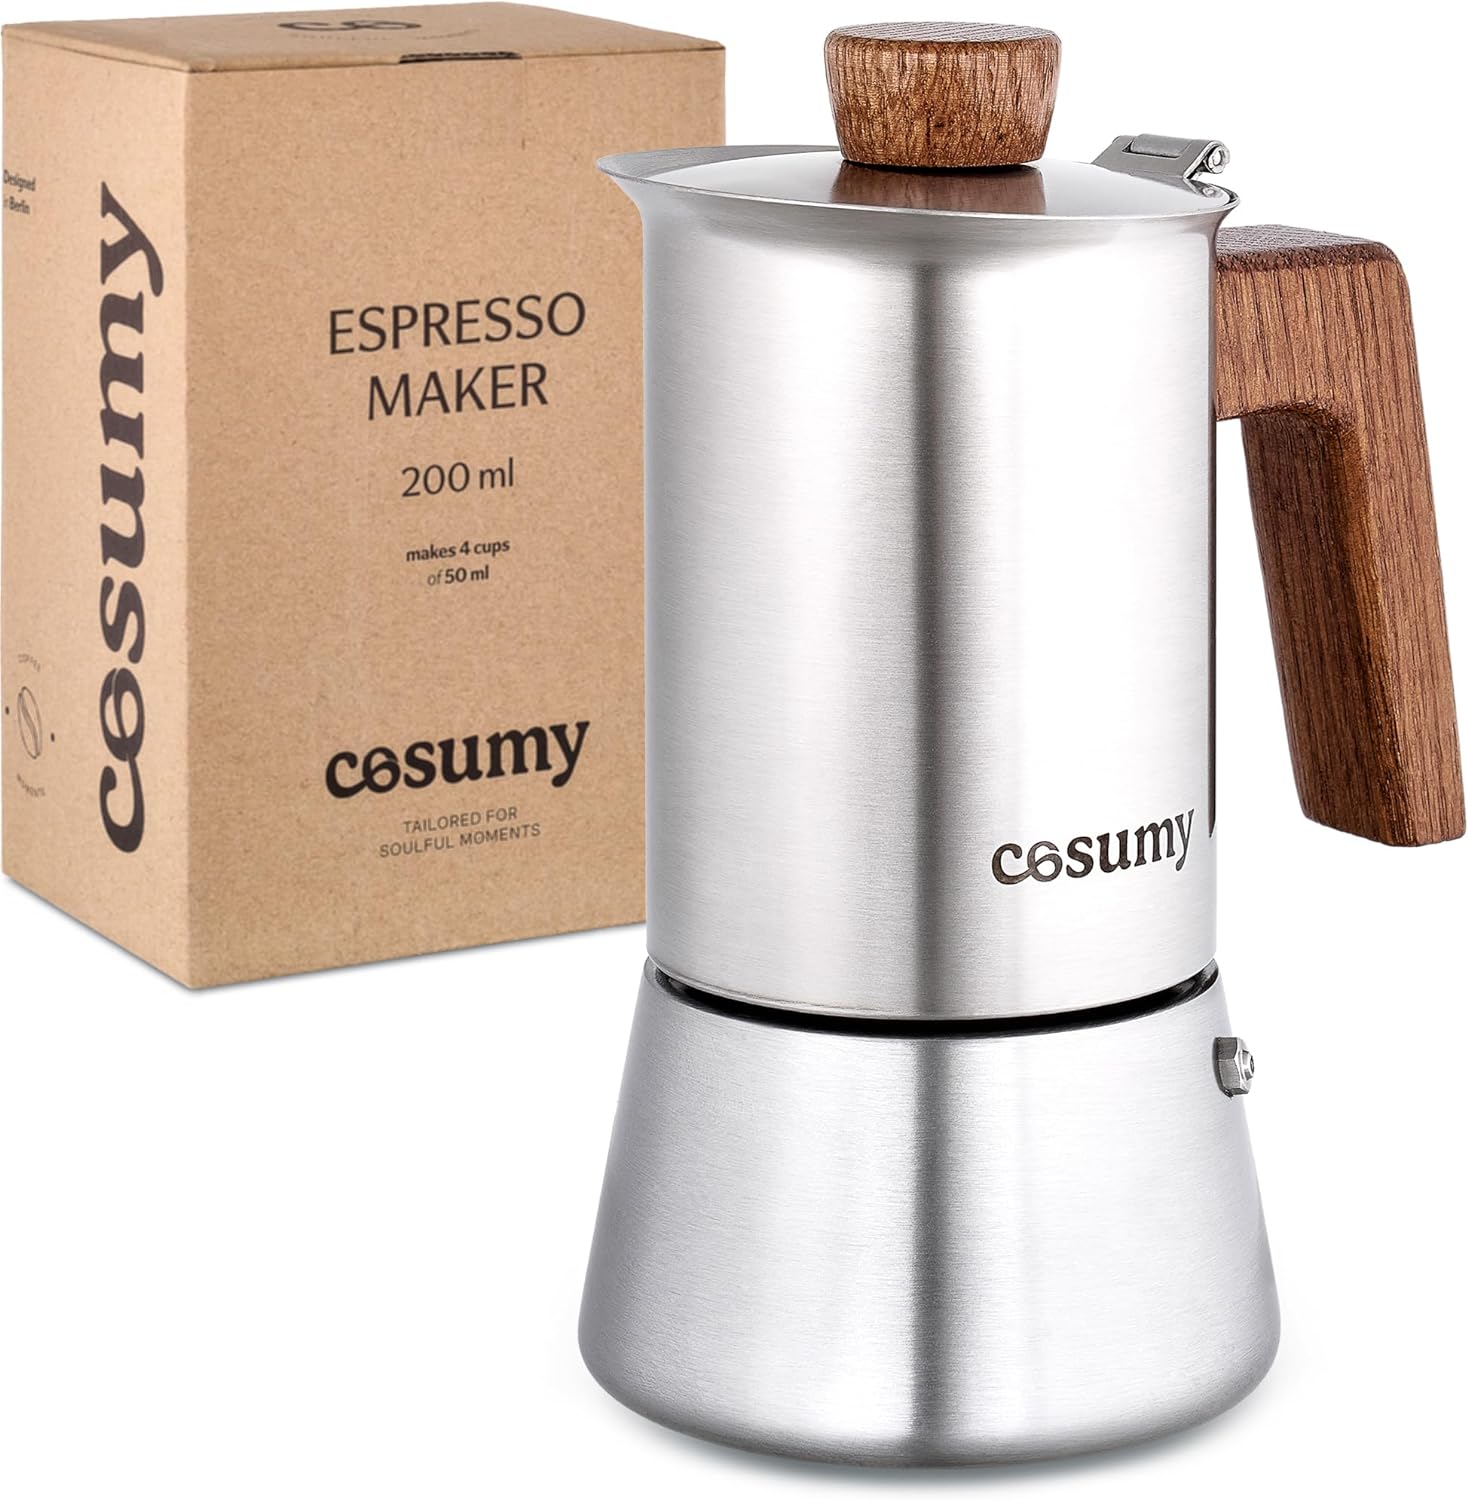 Moka Pot 4 Cups - Stovetop Coffee Maker in Stainless Steel Sustainable Oak Espresso Maker - Suitable for Induction and All Stovetop Types - Italian Cuban Coffee Brewing